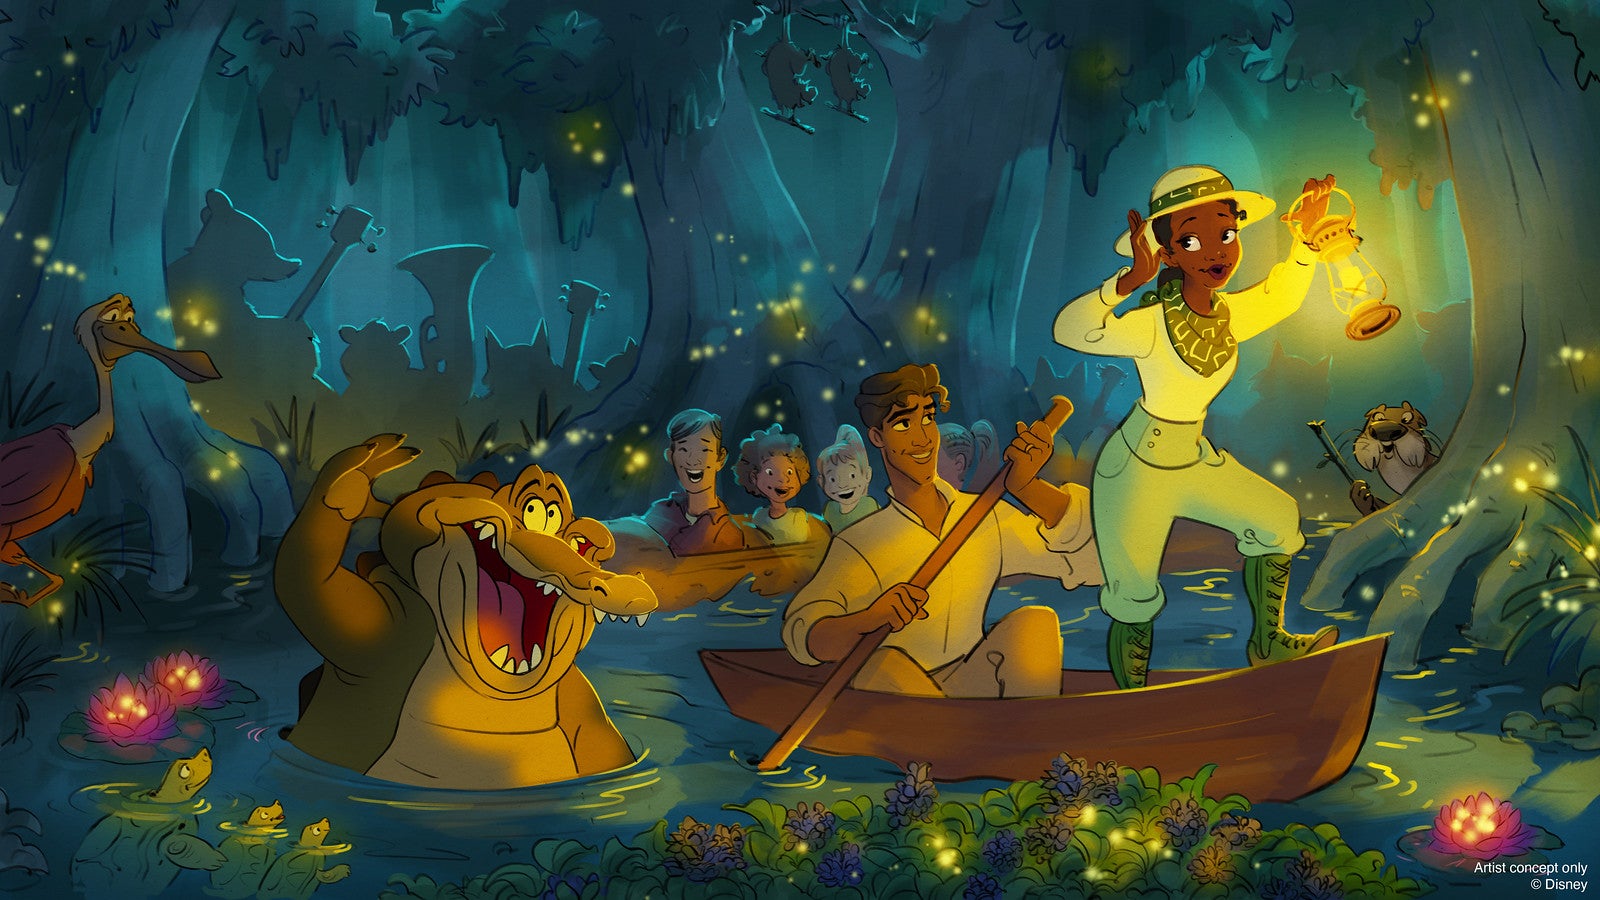 Tiana, The First Black Disney Princess, Will Be Honored With A New